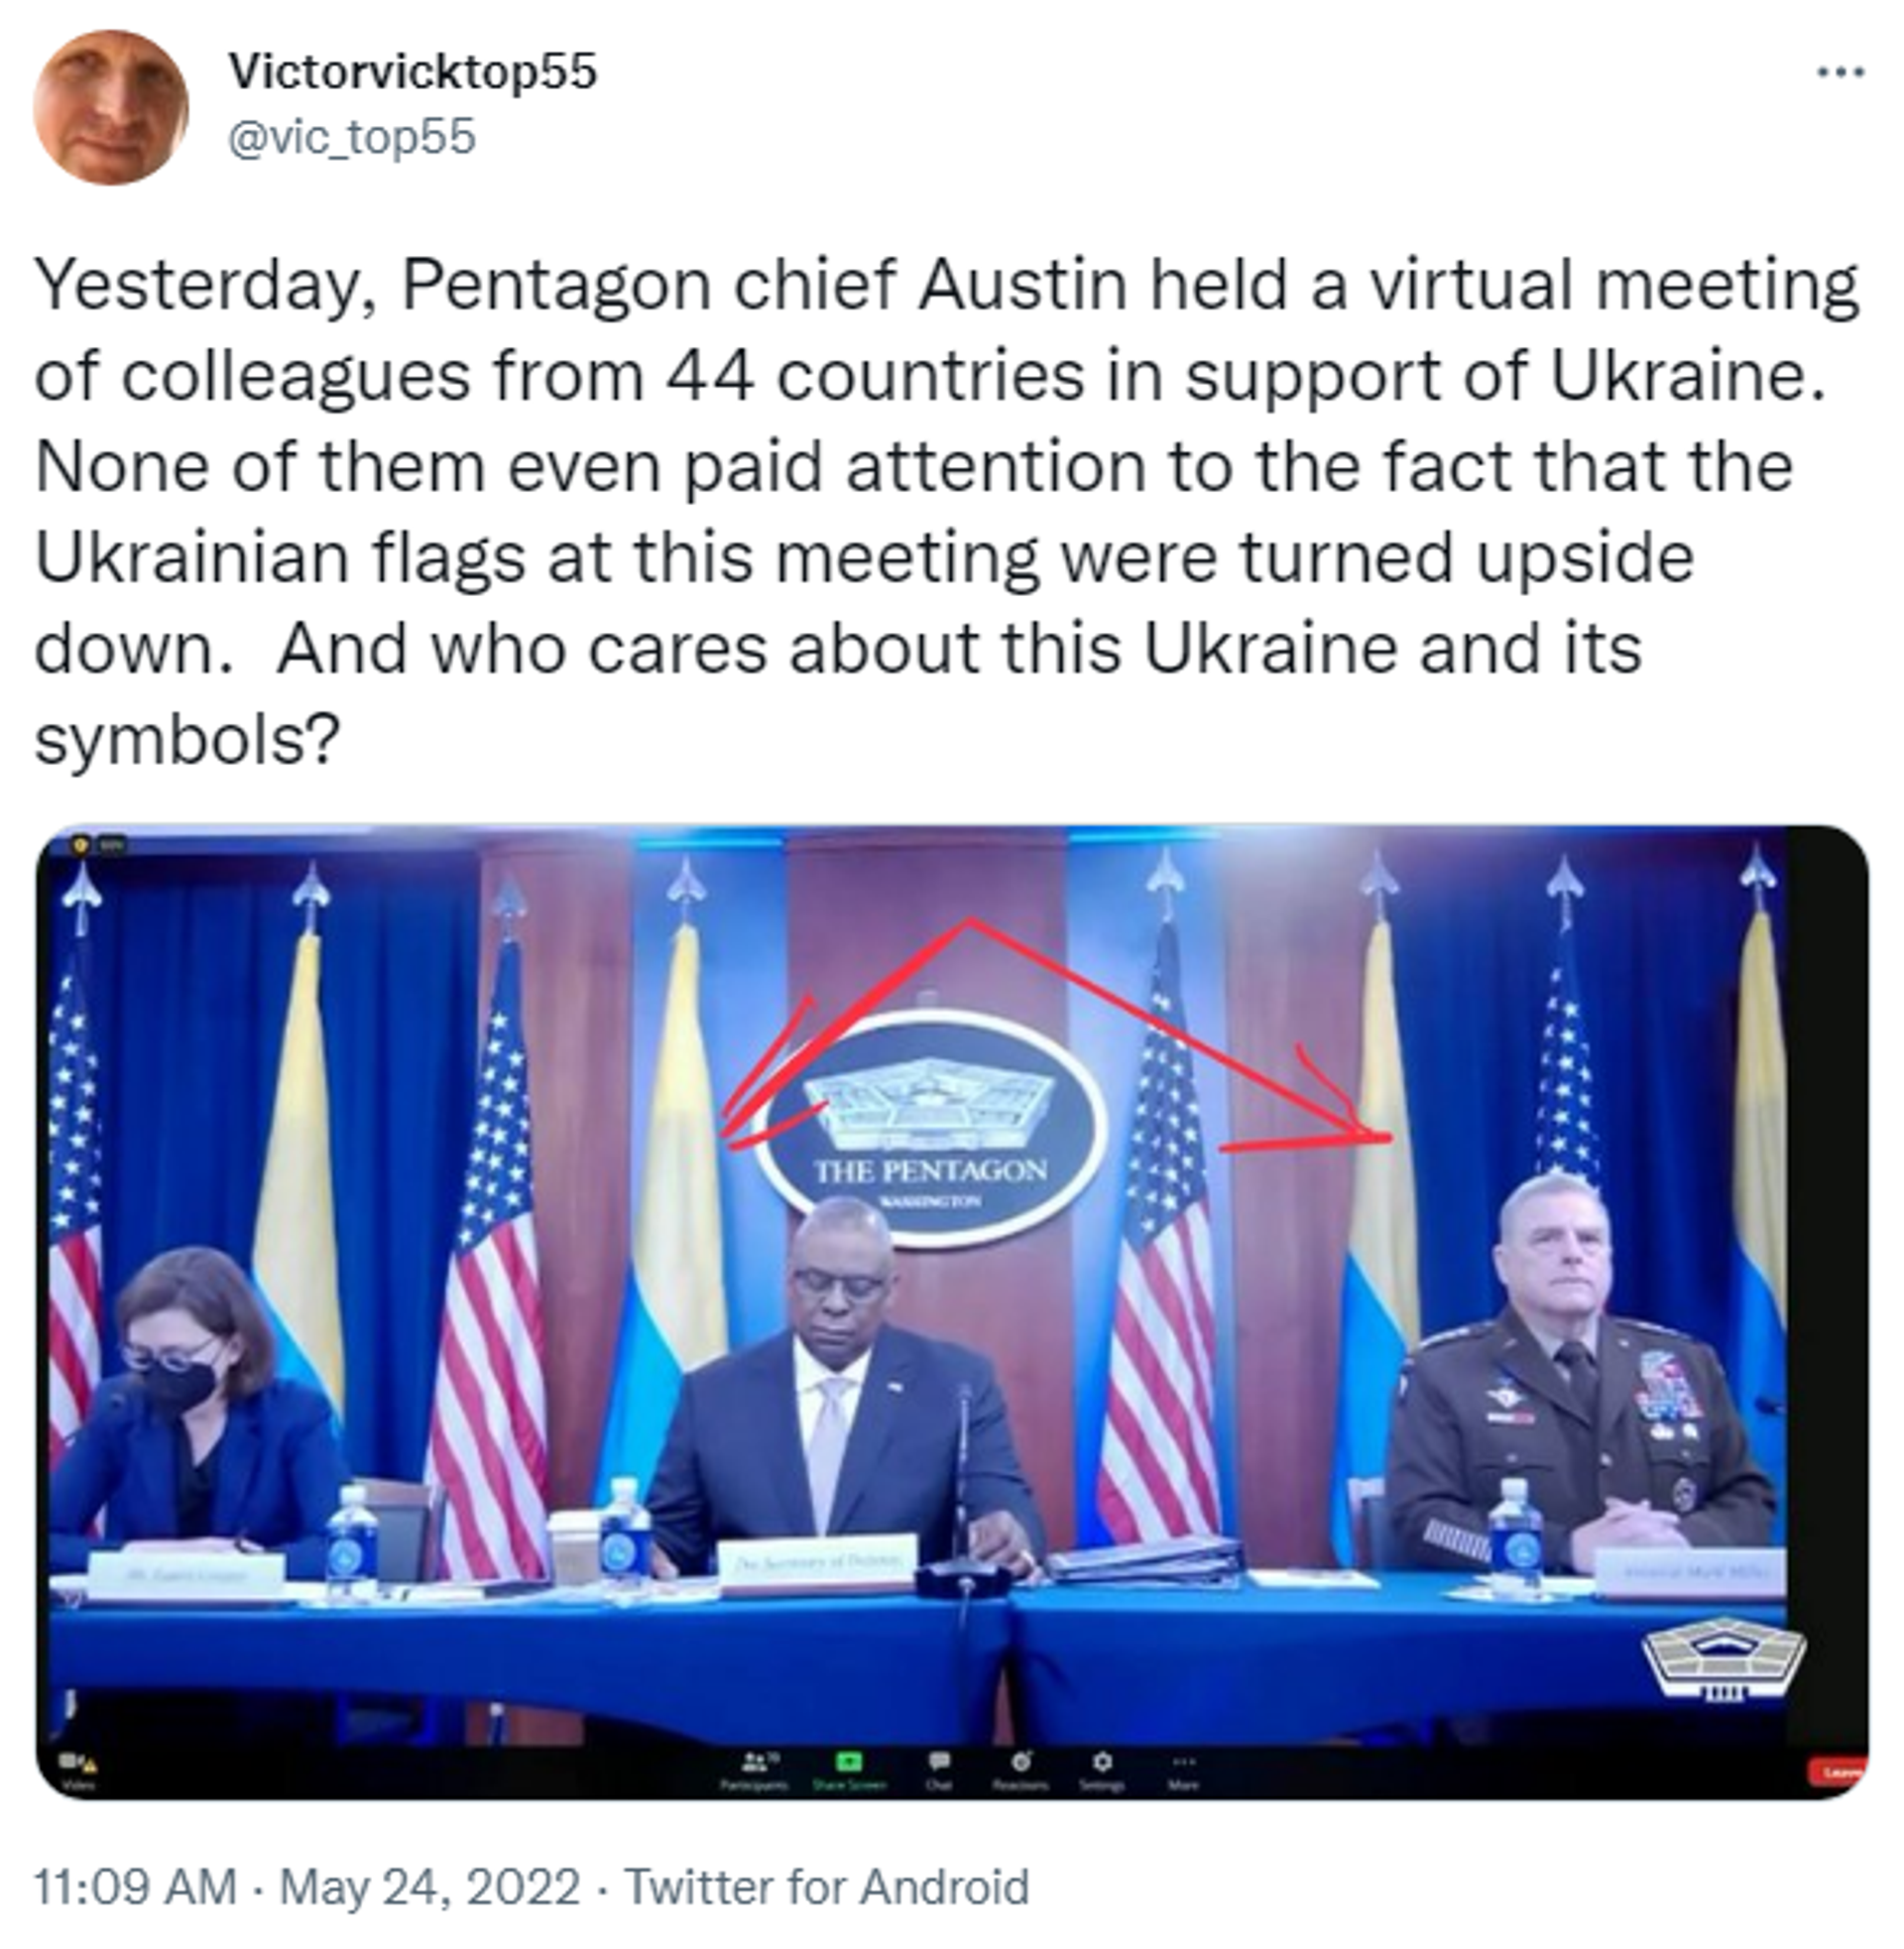 Tweet ridiculing upside-down Ukrainian flags at an international meeting of defence ministers to raise military aid for Ukraine. - Sputnik International, 1920, 25.05.2022